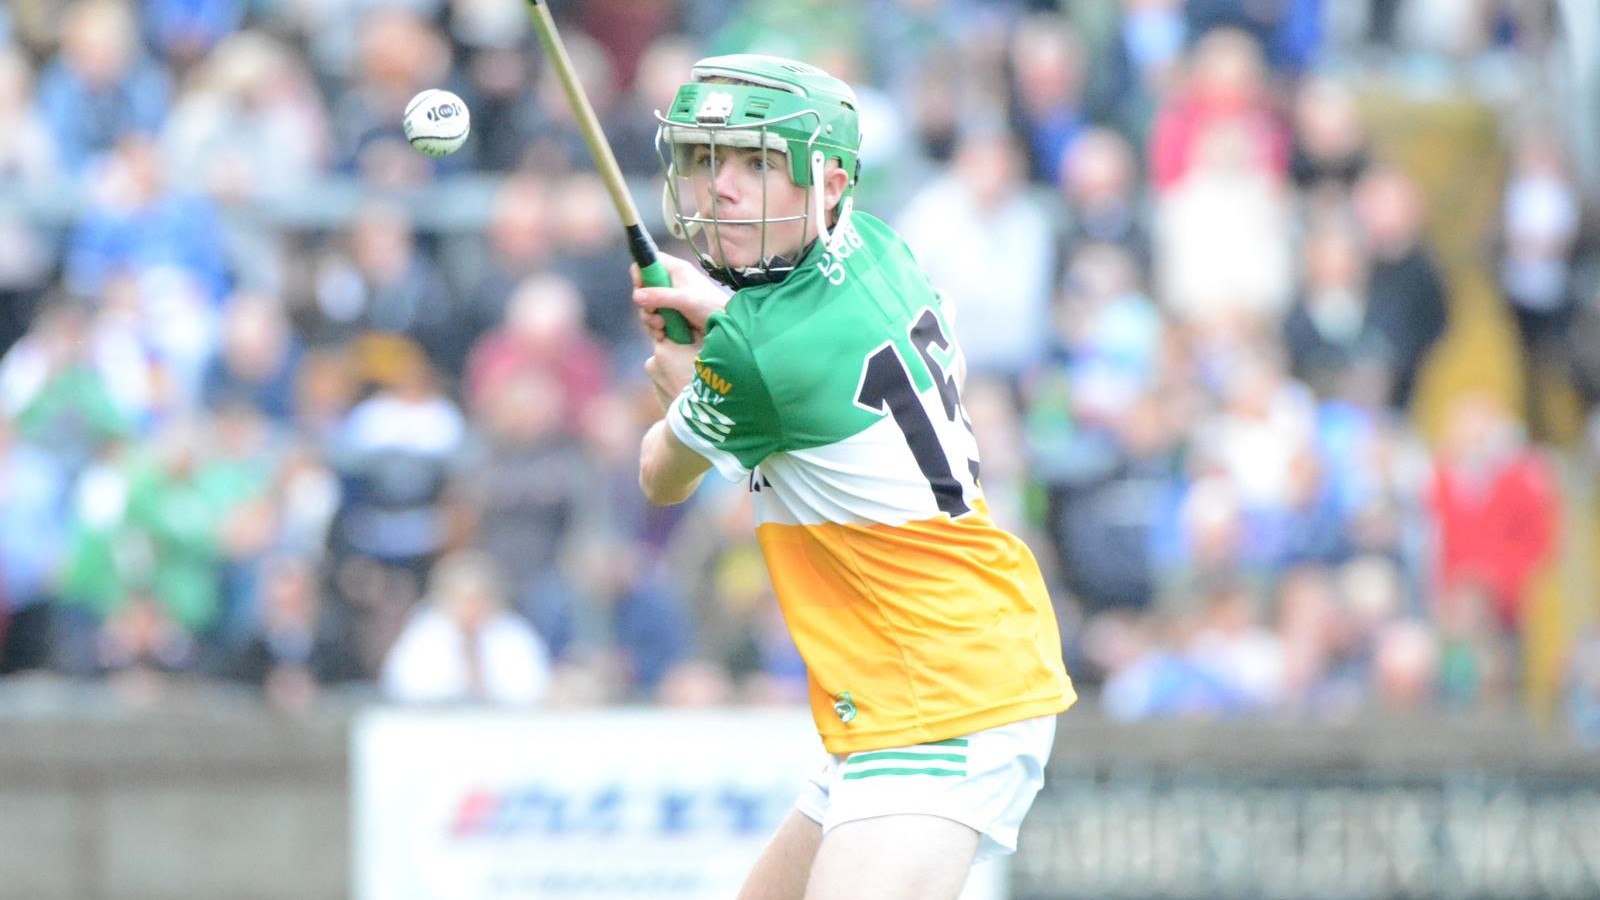 Offaly Minors On Electric Ireland ‘Team Of The Year’